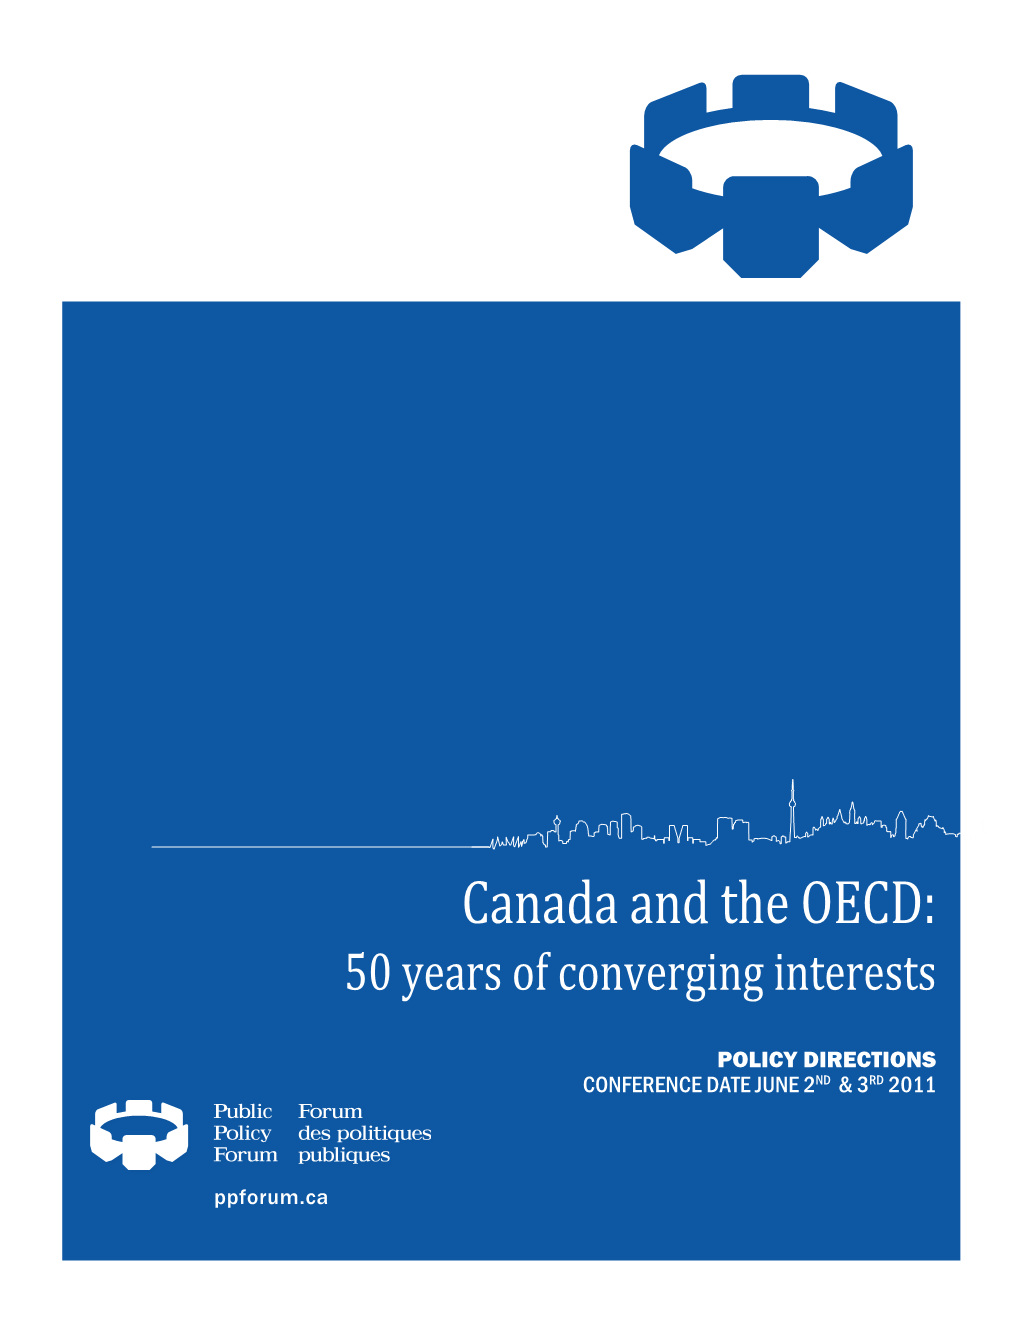 Canada and the OECD: 50 Years of Converging Interests